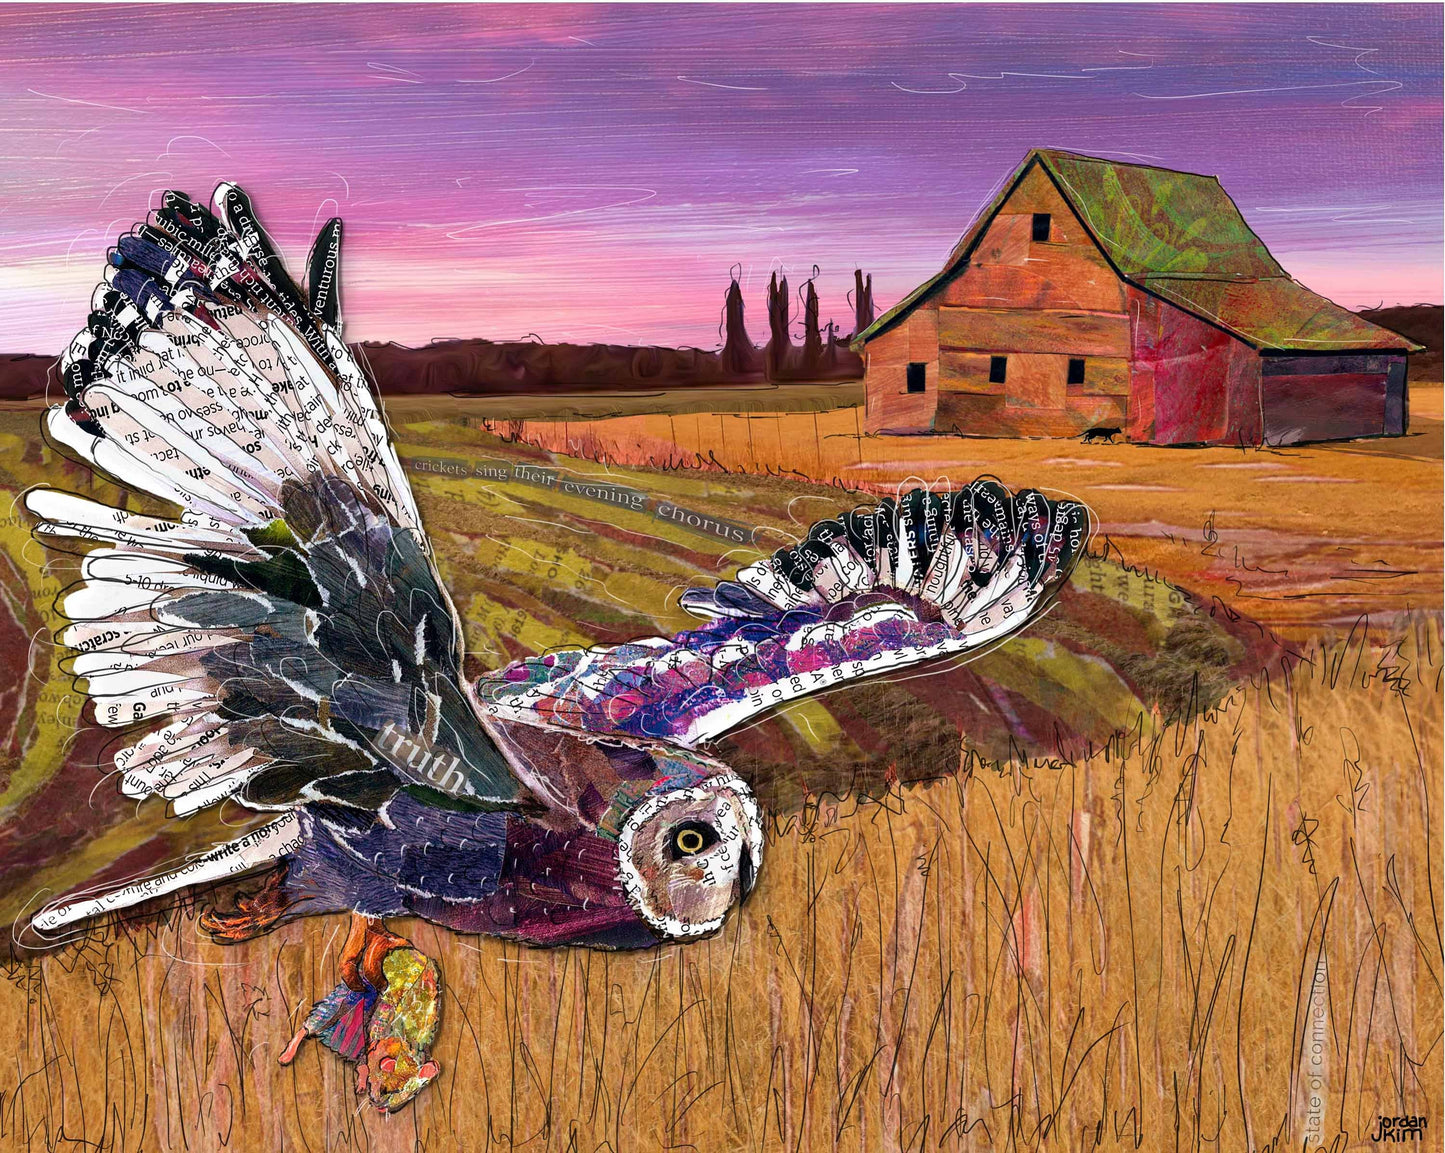 8x10 Art print of a Paper Collage of a barn owl hunting at sunset, barn in background - Wall Art